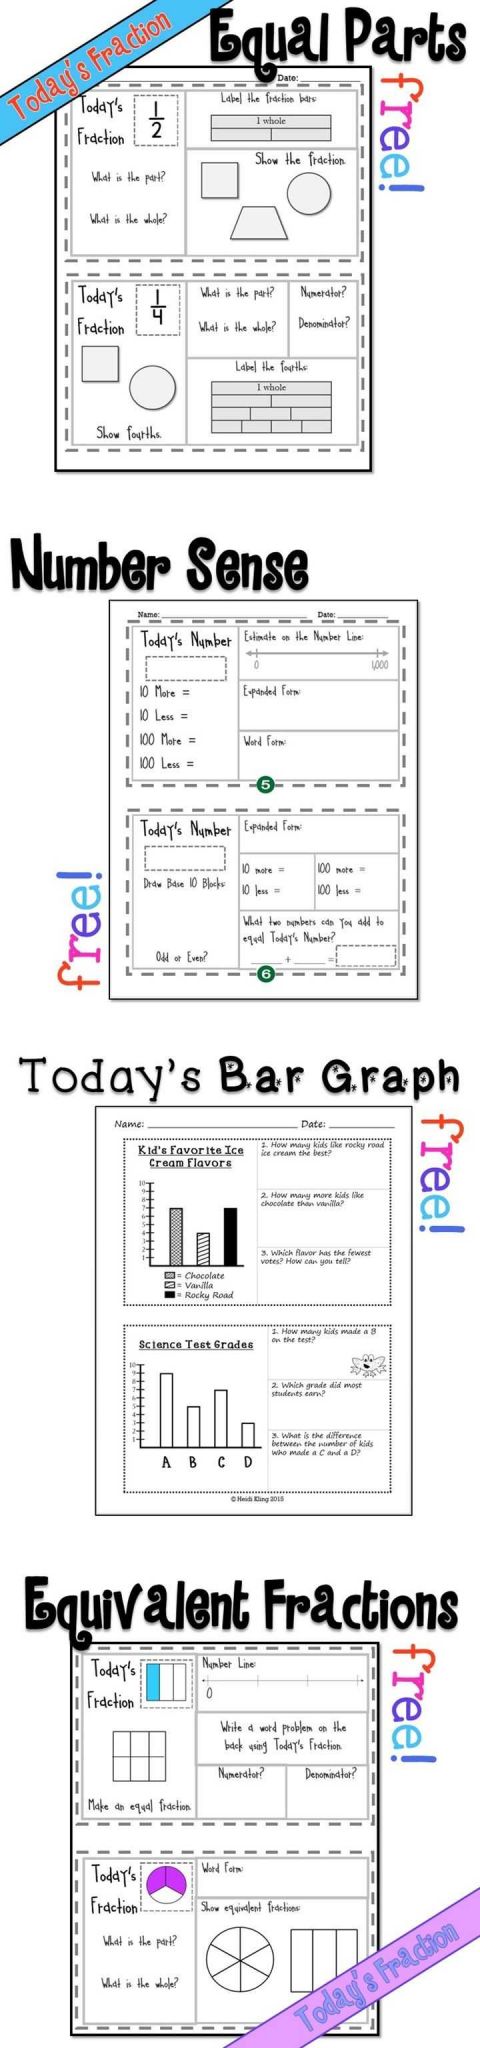 Ratios Involving Complex Fractions Worksheet or 645 Best Math Images On Pinterest